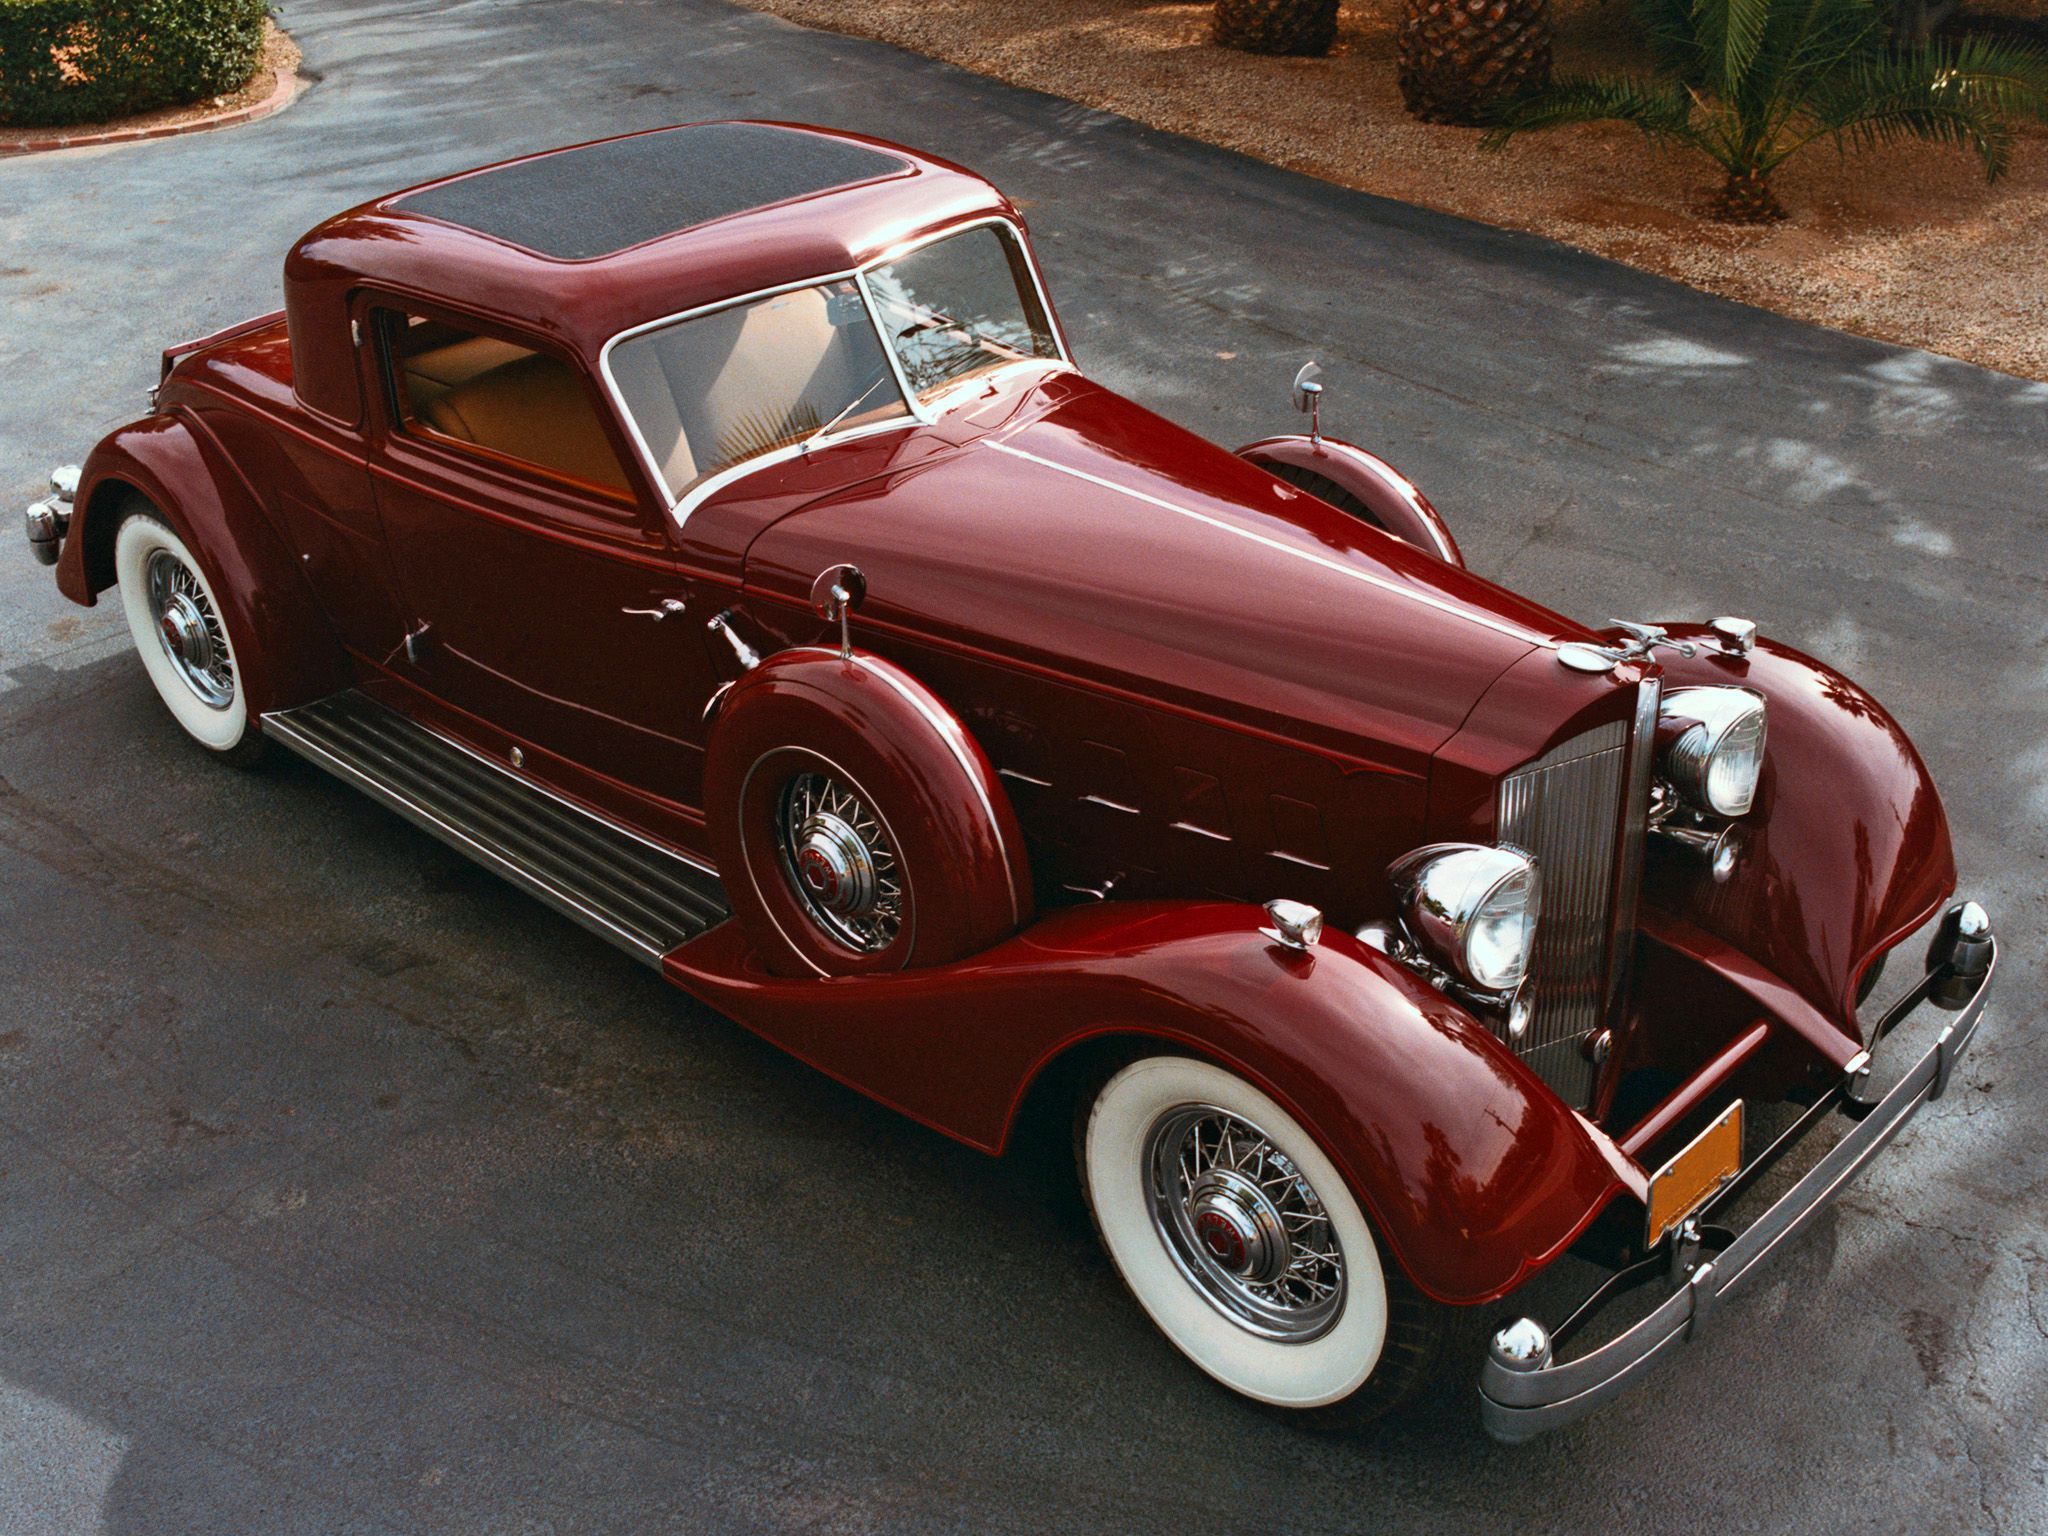 A Red 1934 Packard Twelve Coupe